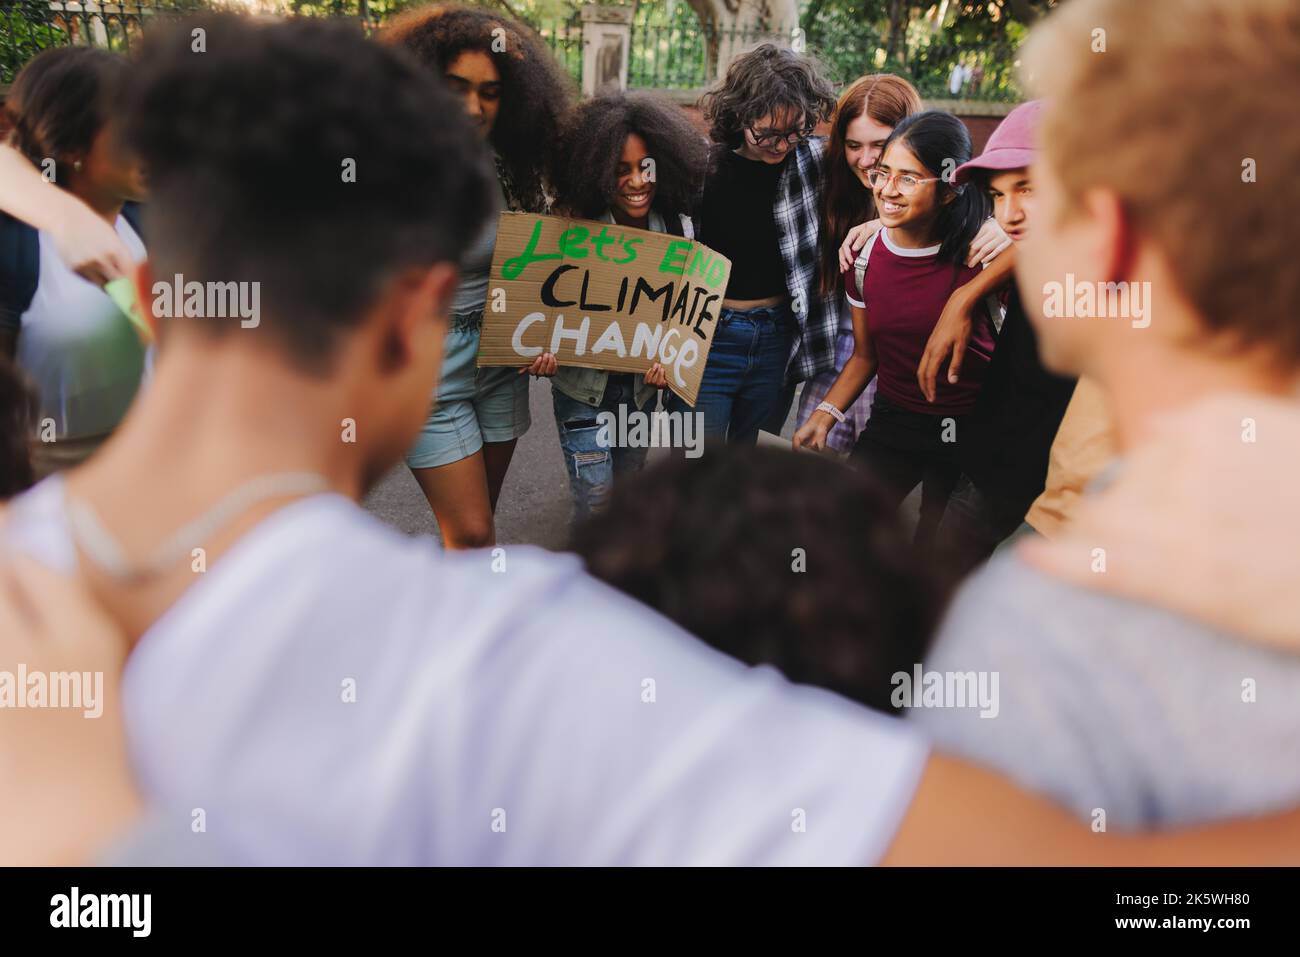 Group of multicultural youth activists standing together in a circle at a climate change demonstration. Generation Z youngsters joining the global cli Stock Photo